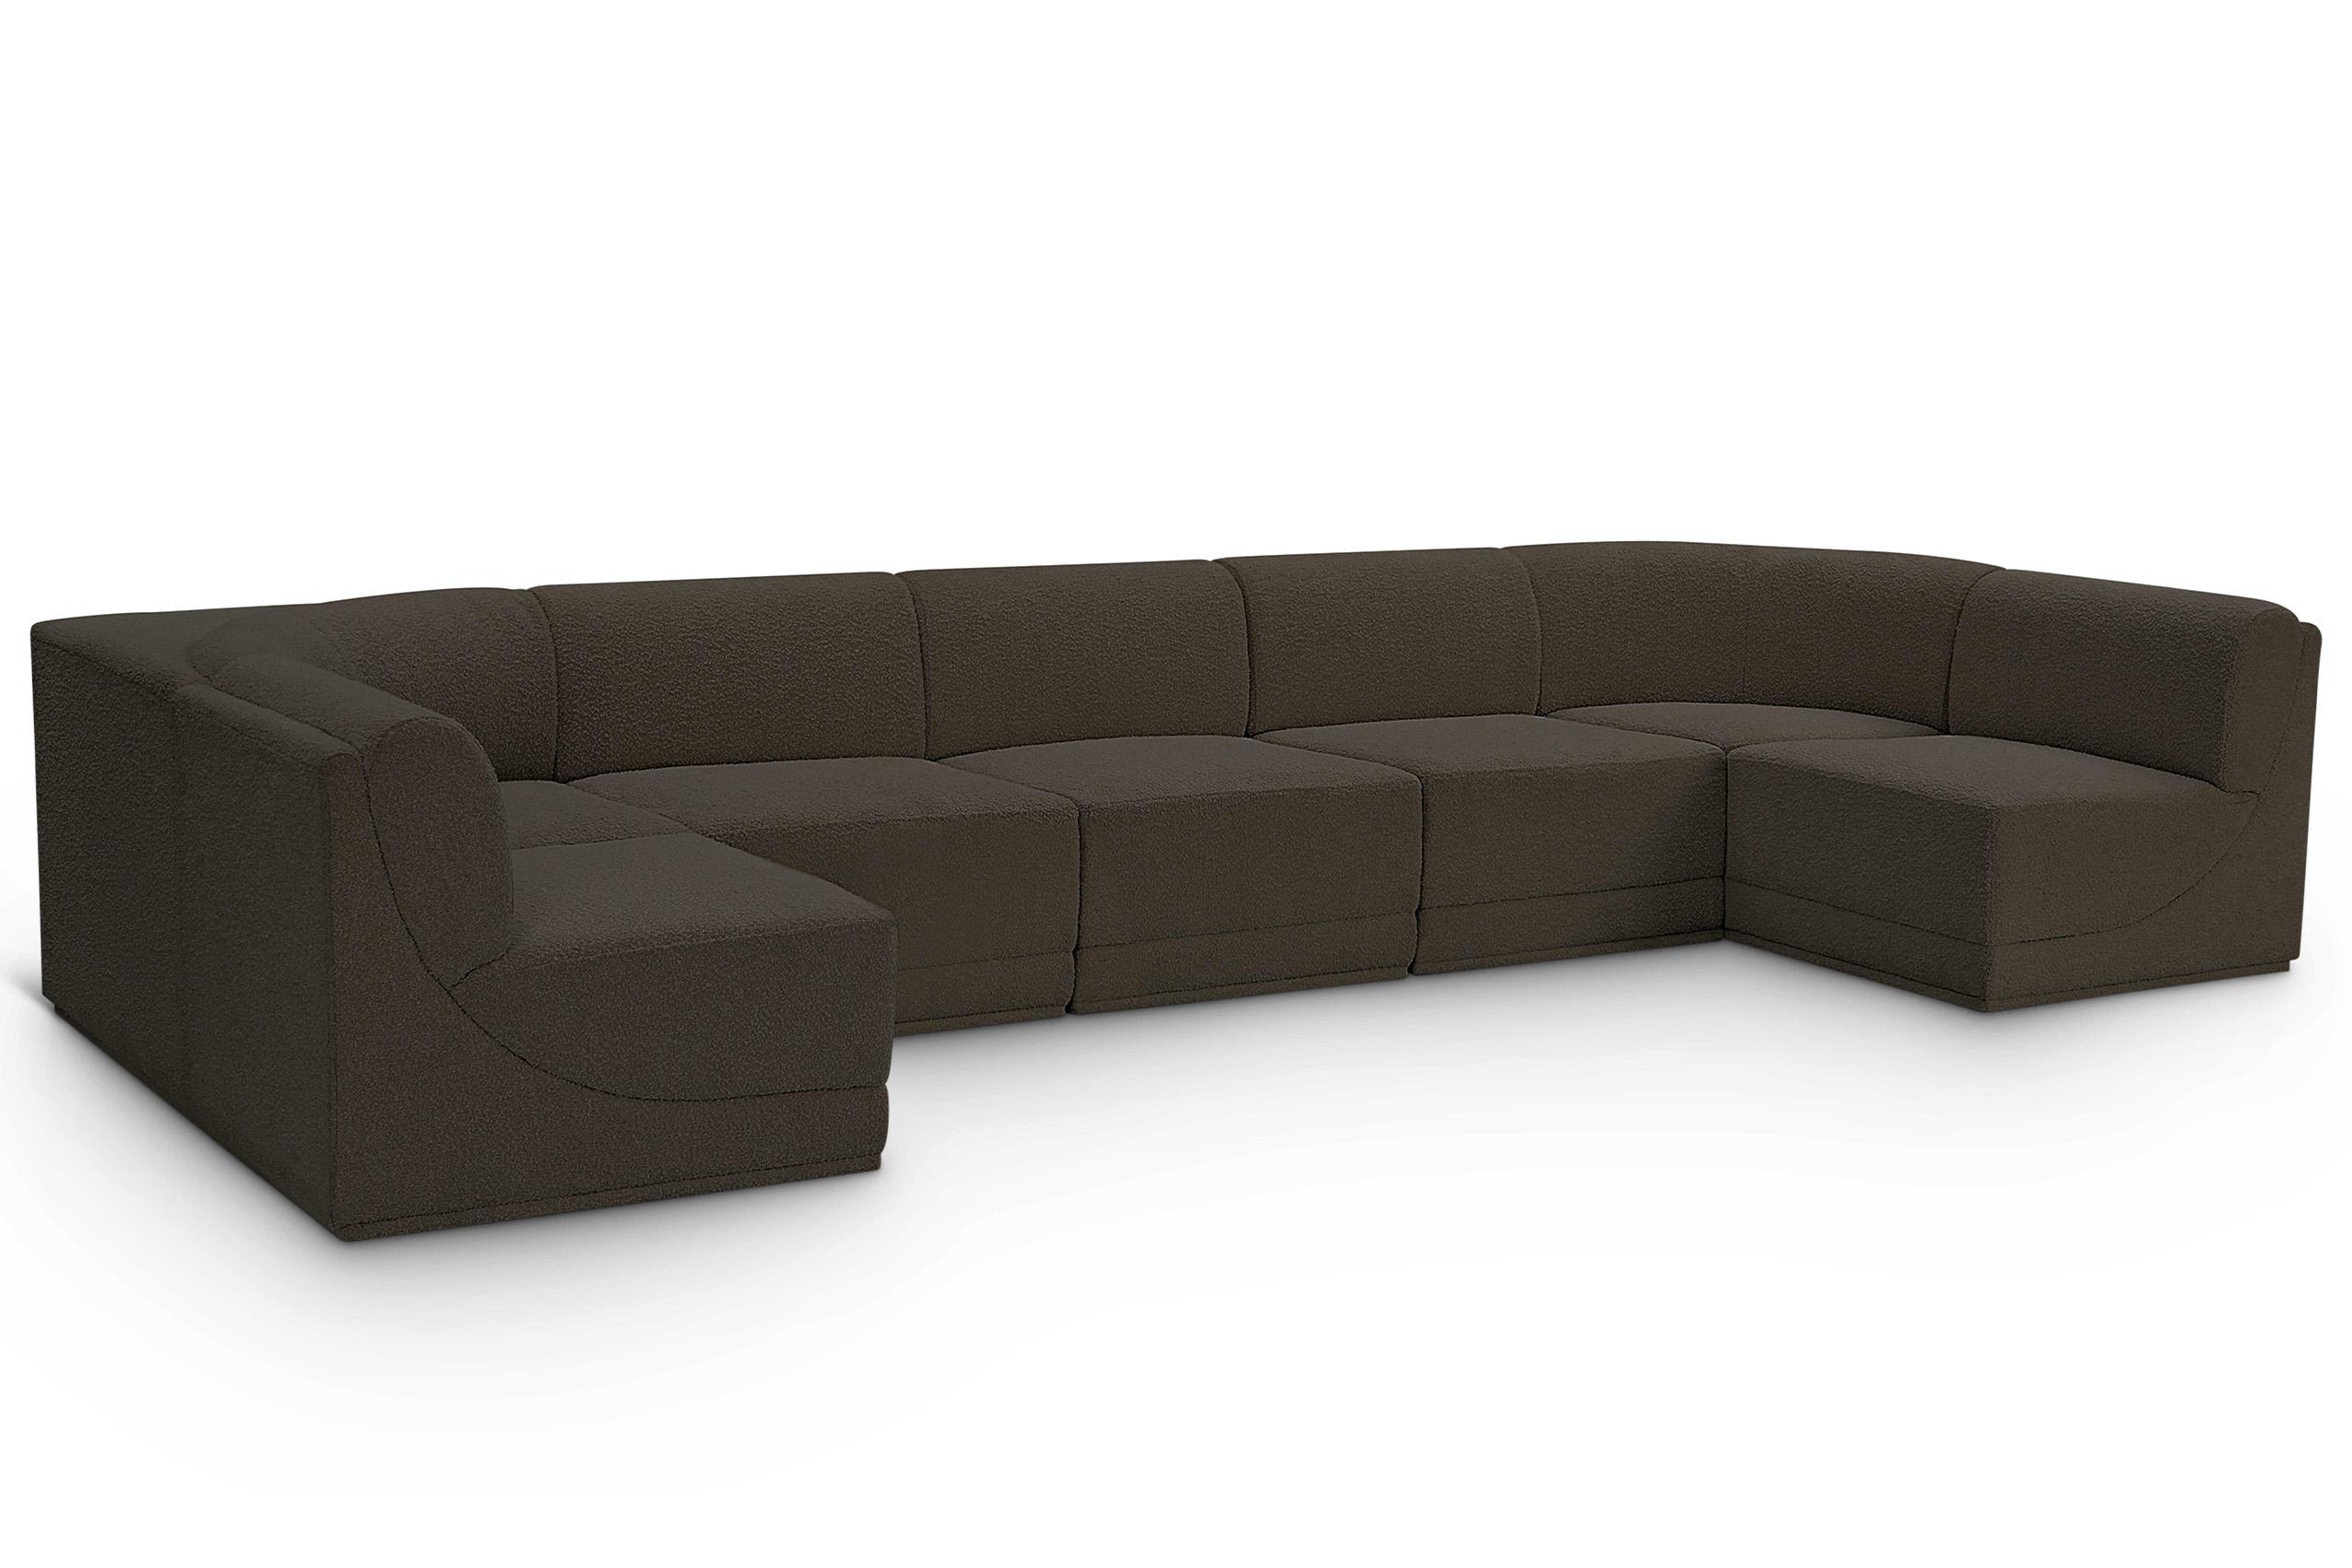 Contemporary, Modern Modular Sectional Ollie 118Brown-Sec7A 118Brown-Sec7A in Brown 